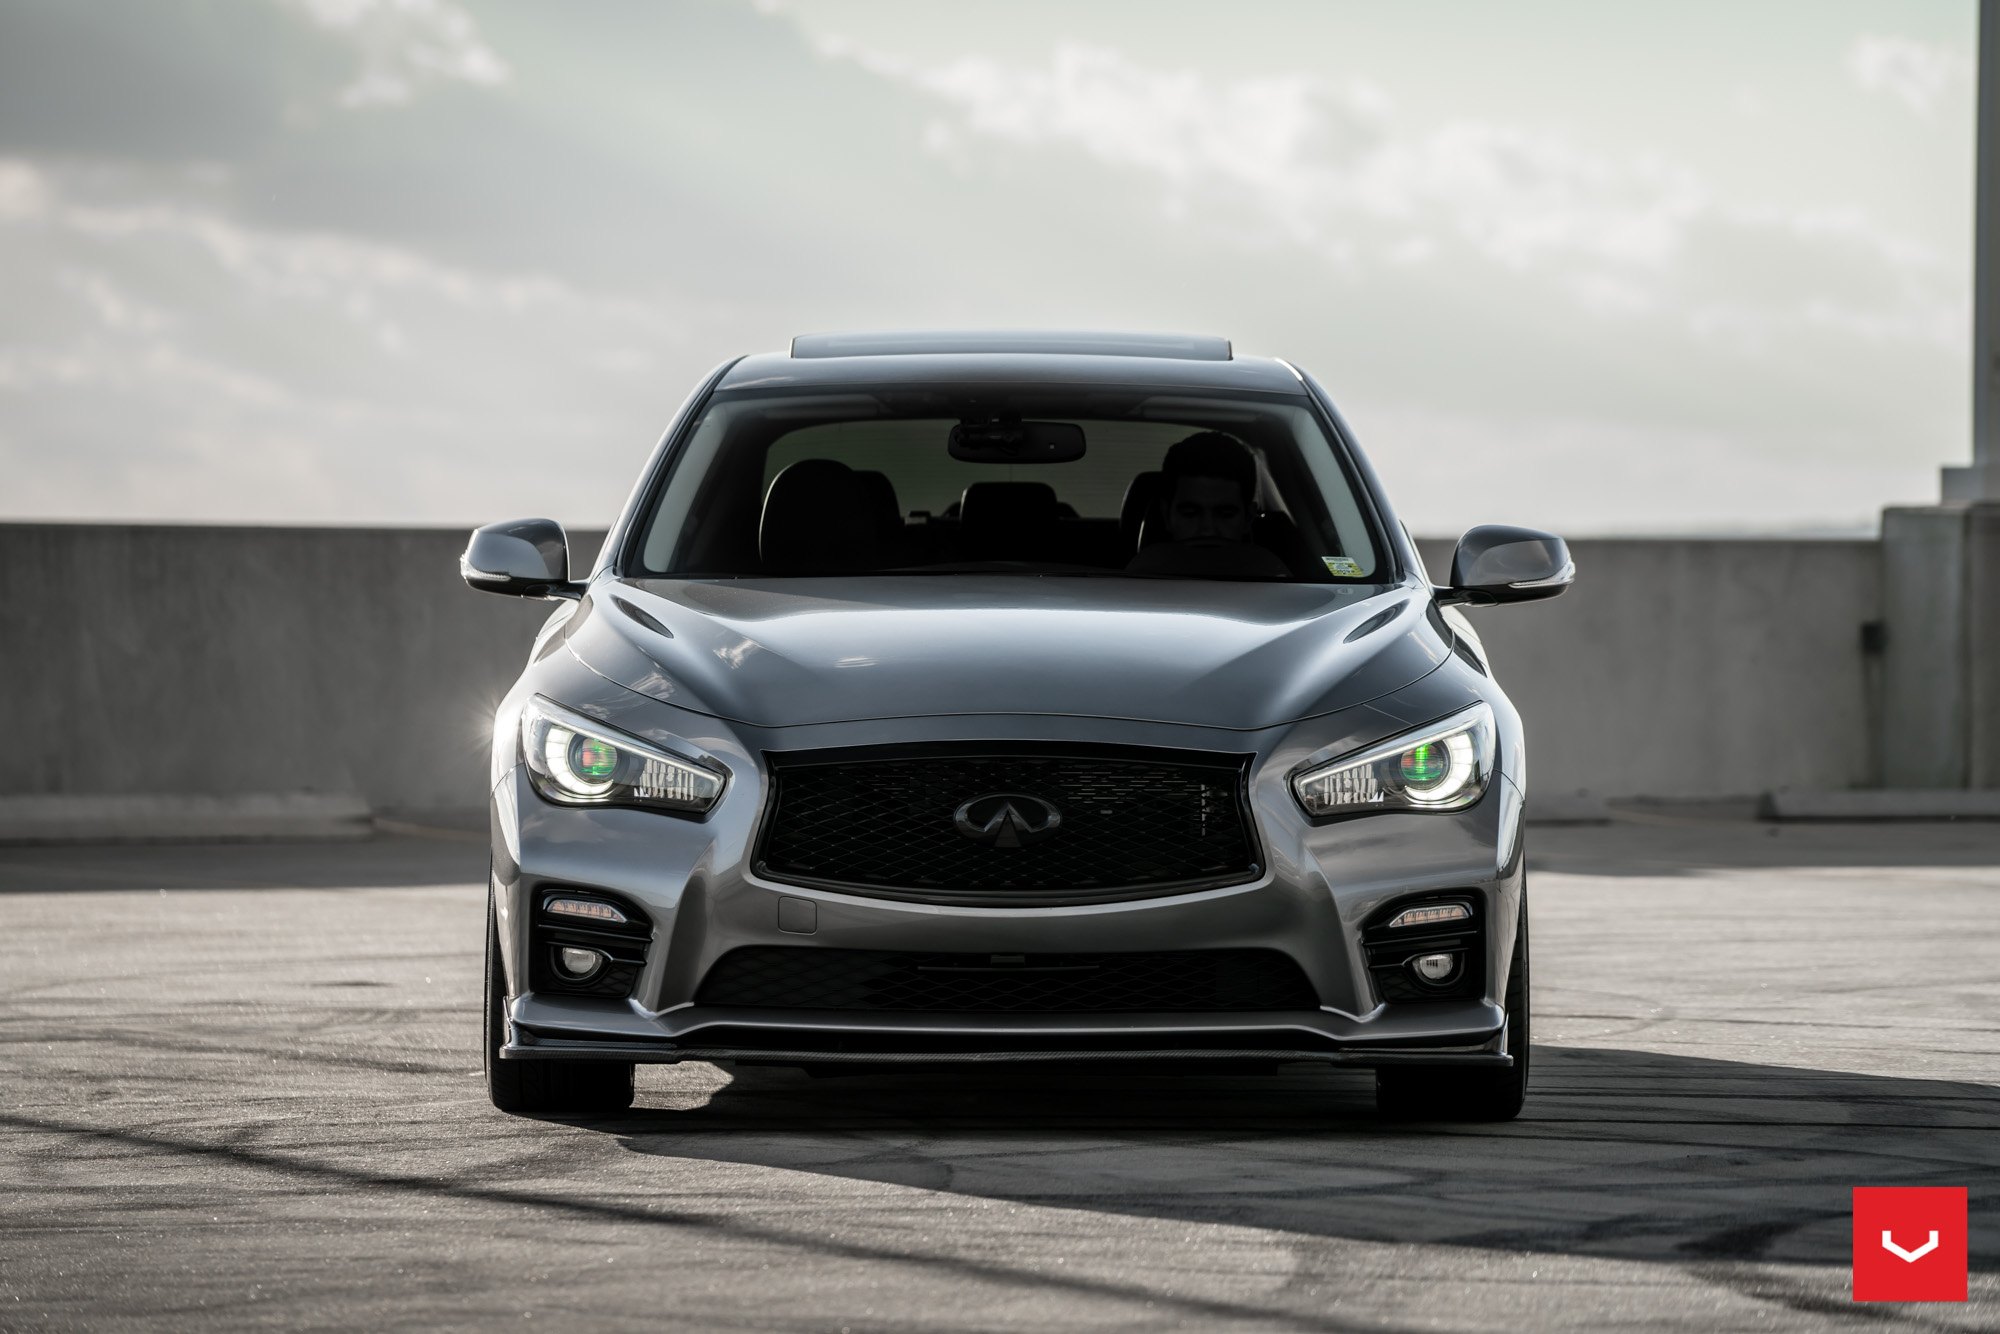 Gray Infiniti Q50 with Blacked Out Mesh Grille - Photo by Vossen